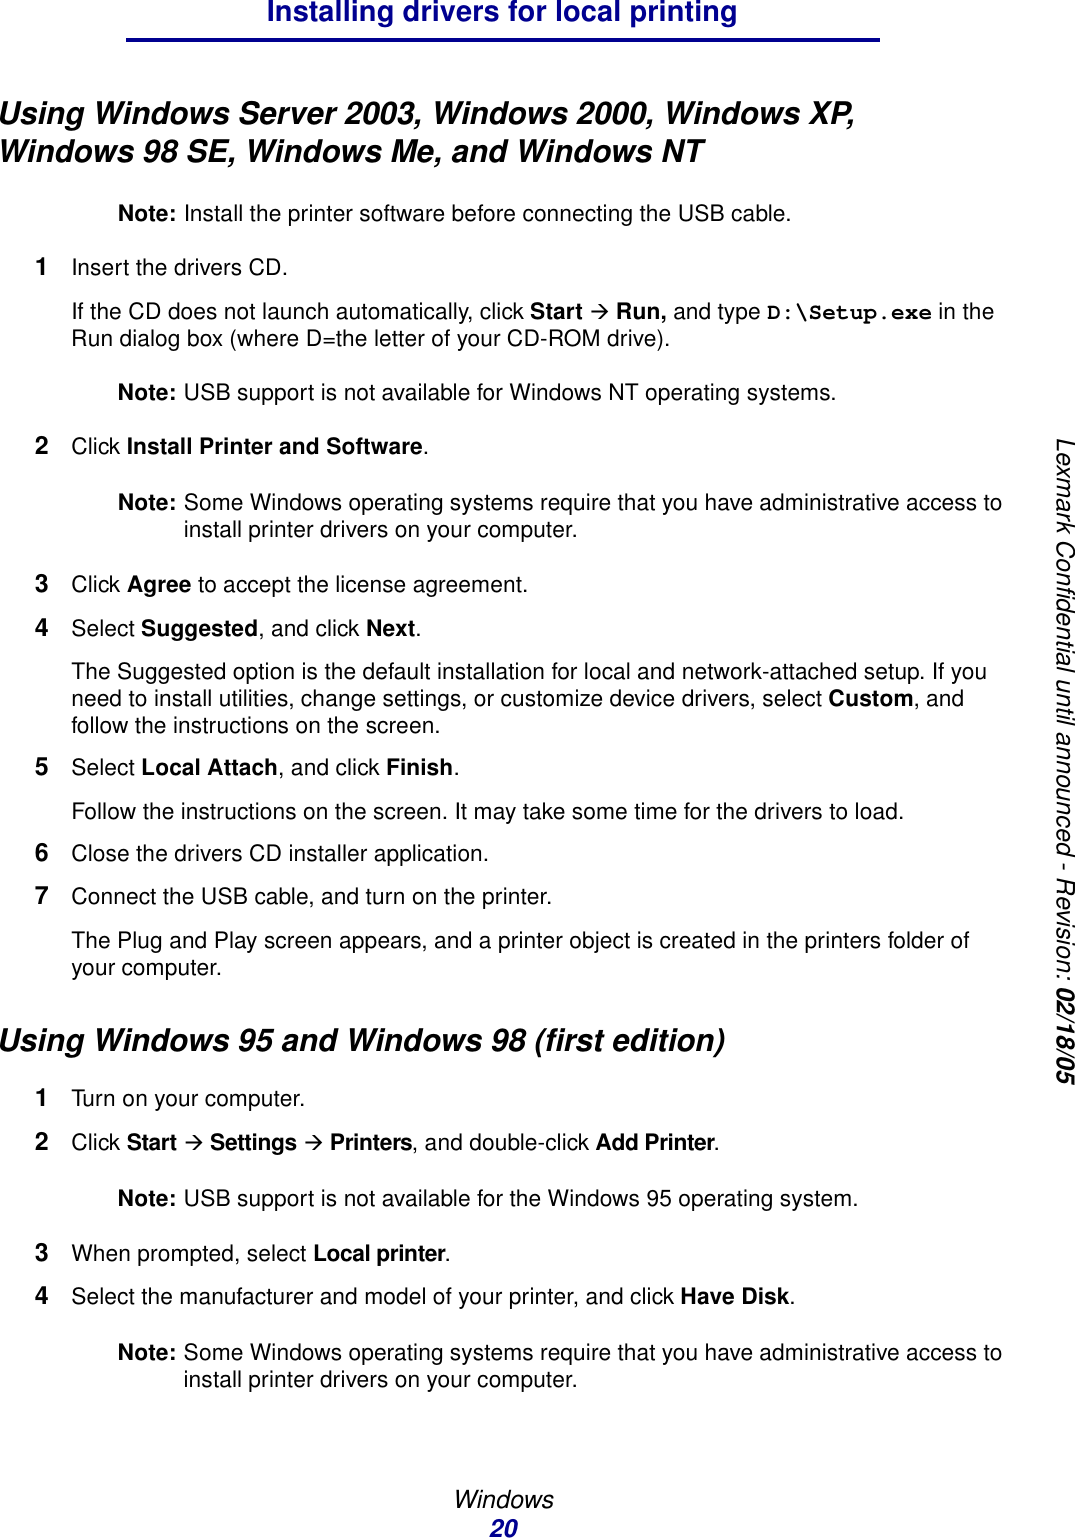 Windows20Installing drivers for local printingLexmark Confidential until announced - Revision: 02/18/05Using Windows Server 2003, Windows 2000, Windows XP, Windows 98 SE, Windows Me, and Windows NTNote: Install the printer software before connecting the USB cable.1Insert the drivers CD.If the CD does not launch automatically, click Start Æ Run, and type D:\Setup.exe in the Run dialog box (where D=the letter of your CD-ROM drive).Note: USB support is not available for Windows NT operating systems.2Click Install Printer and Software.Note: Some Windows operating systems require that you have administrative access to install printer drivers on your computer.3Click Agree to accept the license agreement.4Select Suggested, and click Next.The Suggested option is the default installation for local and network-attached setup. If you need to install utilities, change settings, or customize device drivers, select Custom, and follow the instructions on the screen.5Select Local Attach, and click Finish.Follow the instructions on the screen. It may take some time for the drivers to load.6Close the drivers CD installer application.7Connect the USB cable, and turn on the printer.The Plug and Play screen appears, and a printer object is created in the printers folder of your computer.Using Windows 95 and Windows 98 (first edition)1Turn on your computer. 2Click Start Æ Settings Æ Printers, and double-click Add Printer. Note: USB support is not available for the Windows 95 operating system.3When prompted, select Local printer.4Select the manufacturer and model of your printer, and click Have Disk.Note: Some Windows operating systems require that you have administrative access to install printer drivers on your computer.